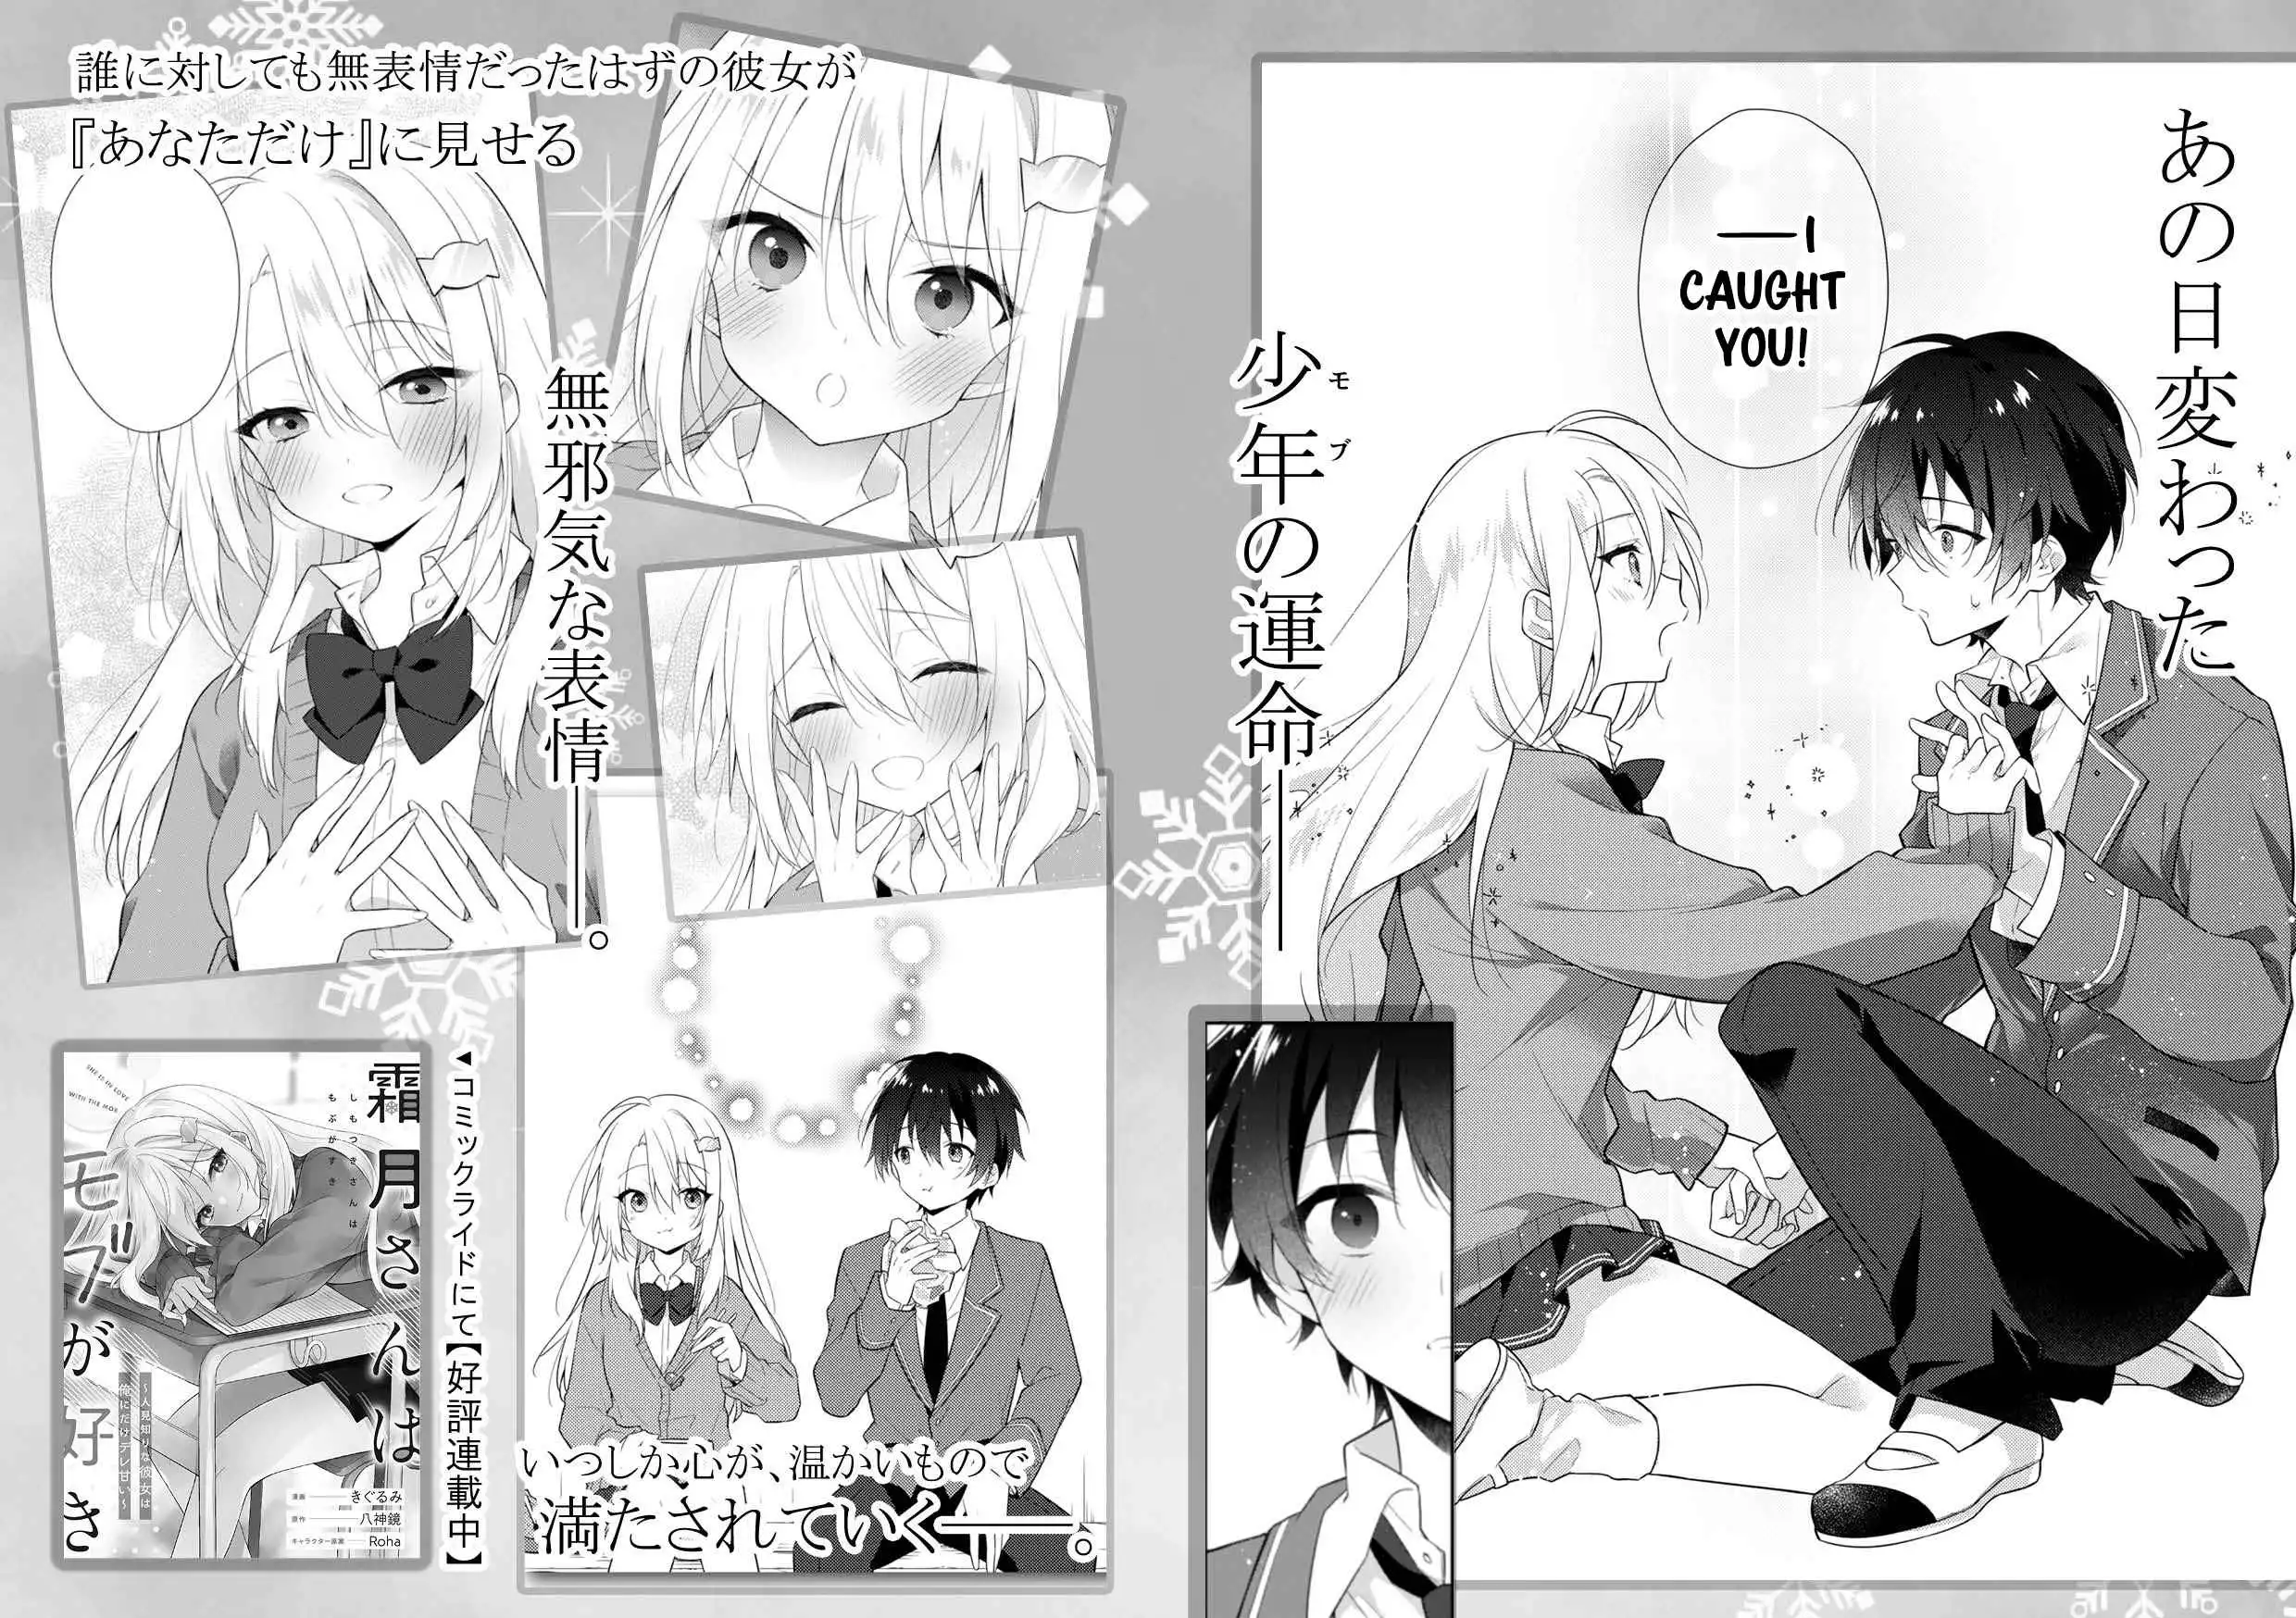 Shimotsuki-san Likes the Mob ~This Shy Girl is Only Sweet Towards Me~ Chapter 1.5